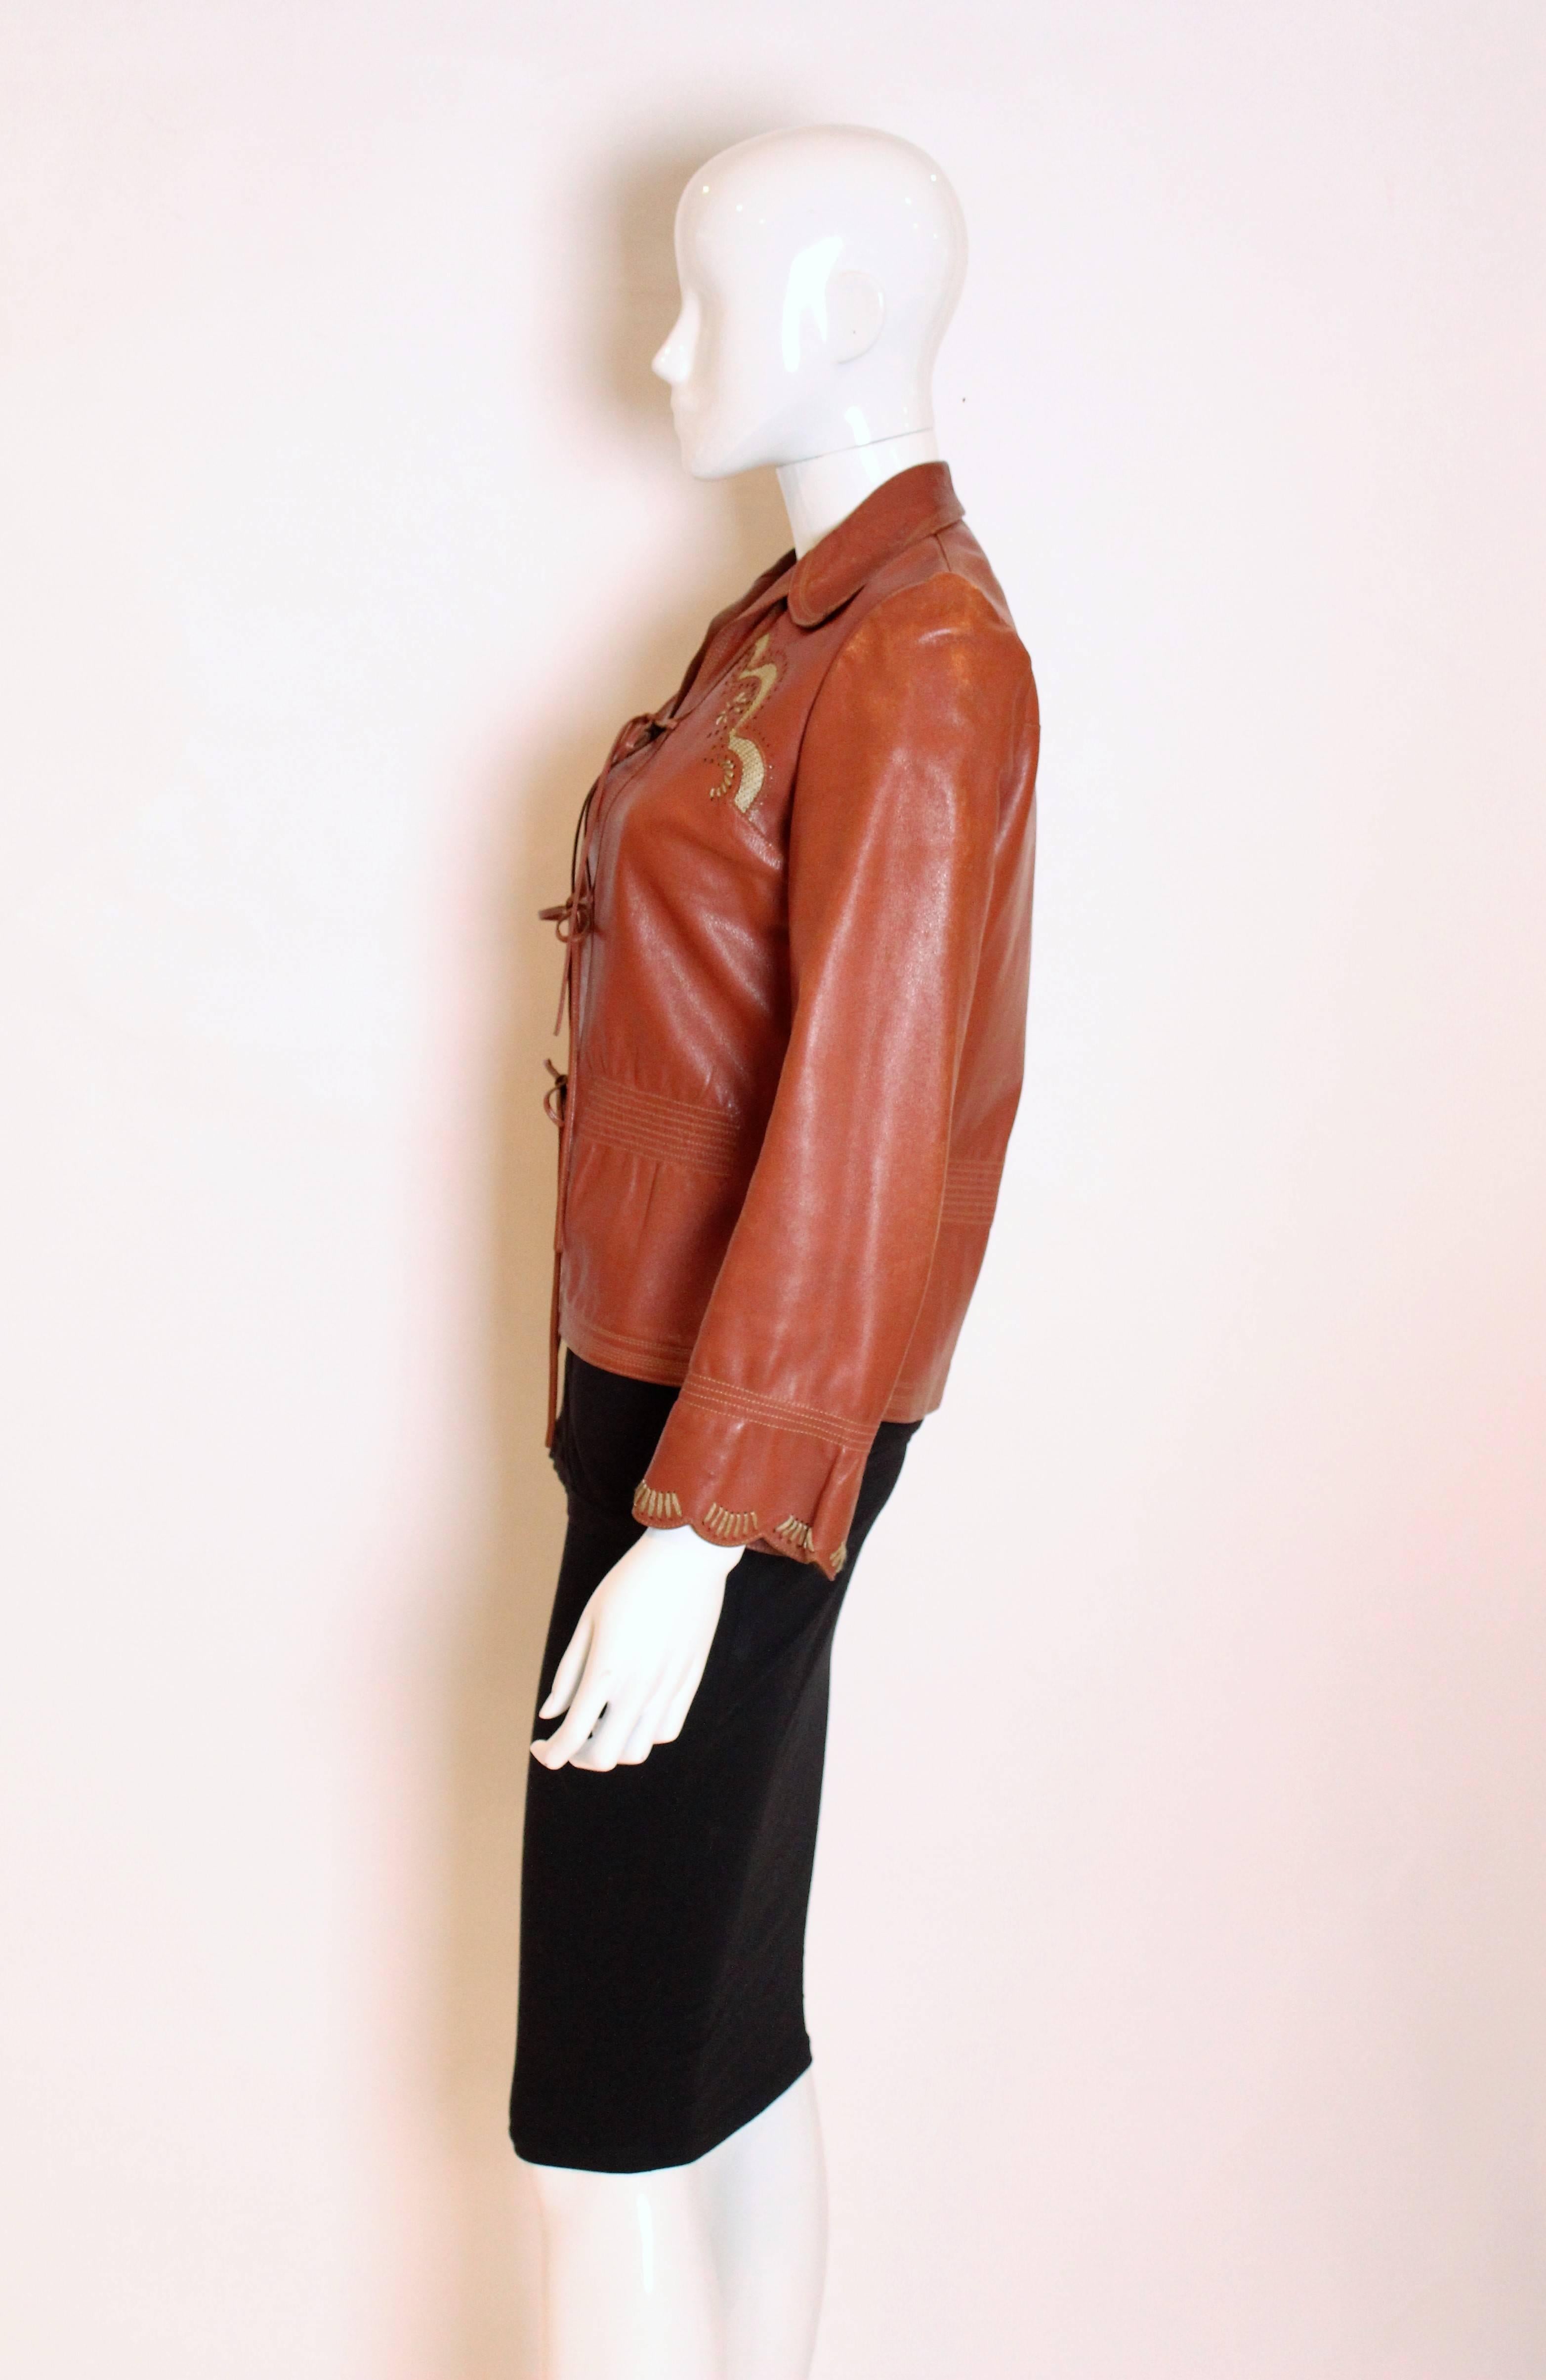 Orange 1970s leather jacket by Jean and Michael Pallant